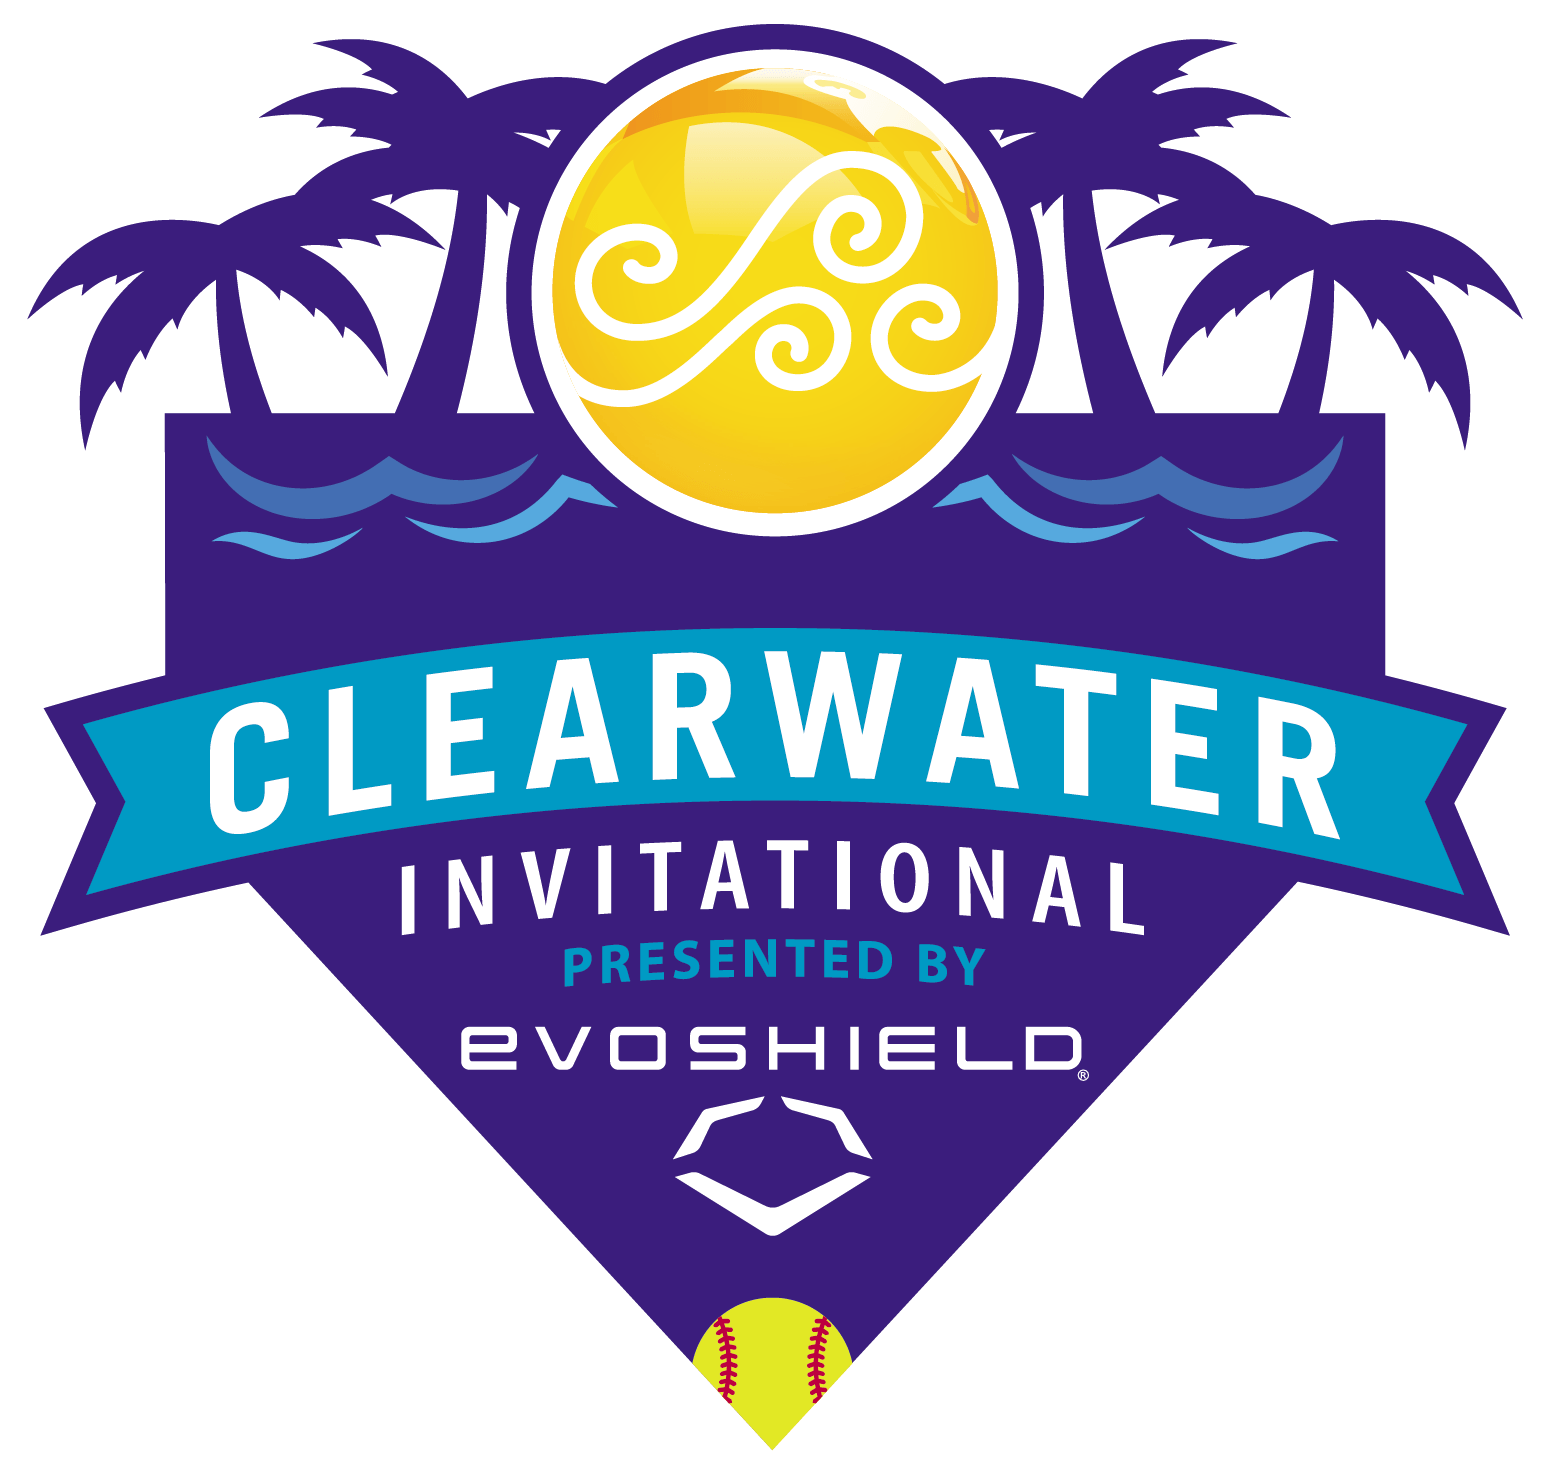 Clearwater Invitational Presented by EvoShield ESPN Events